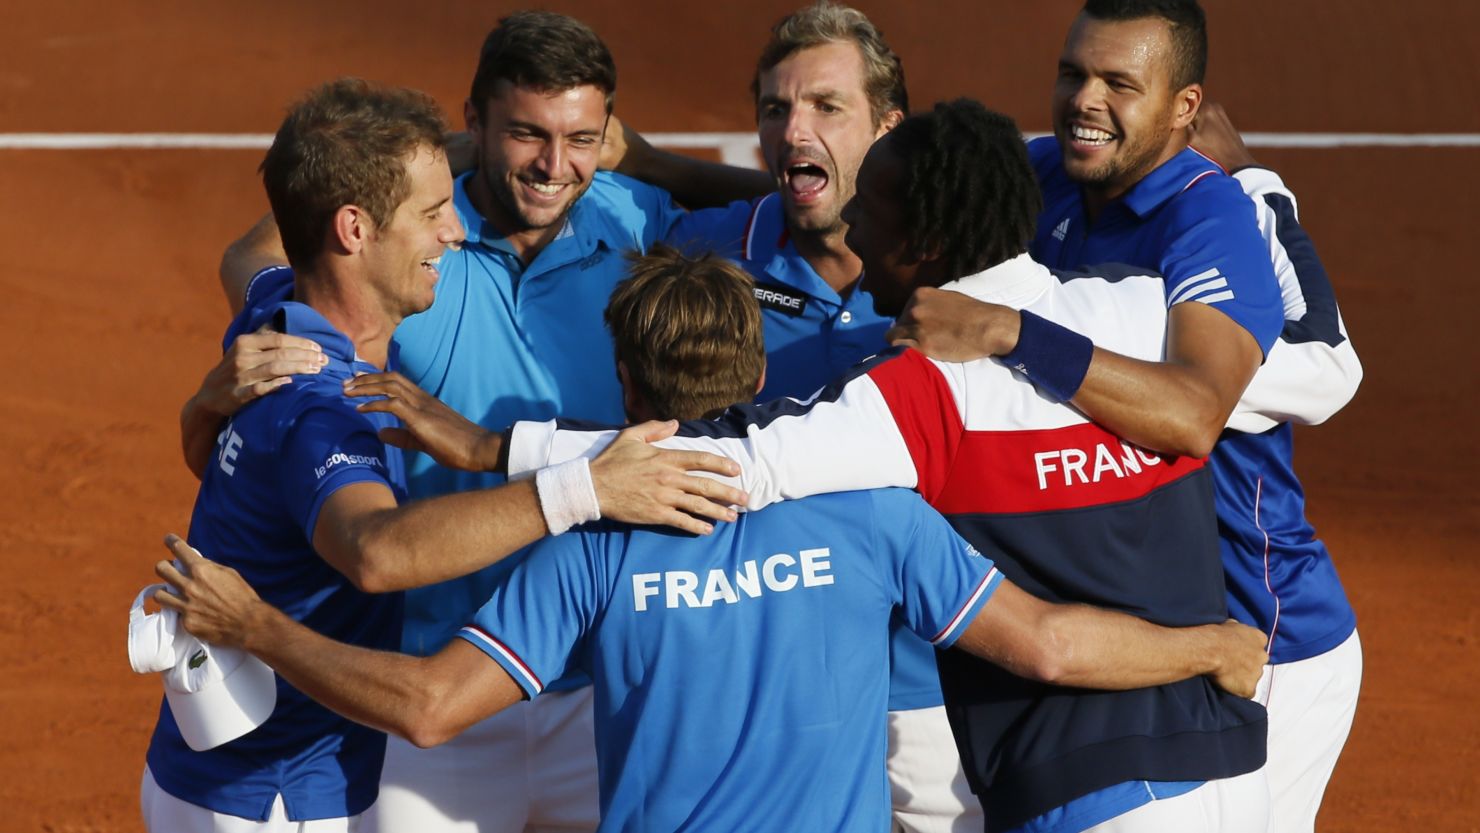 The French Davis Cup team celebrate victory over the Czech Republic at Roland Garros on Saturday.  